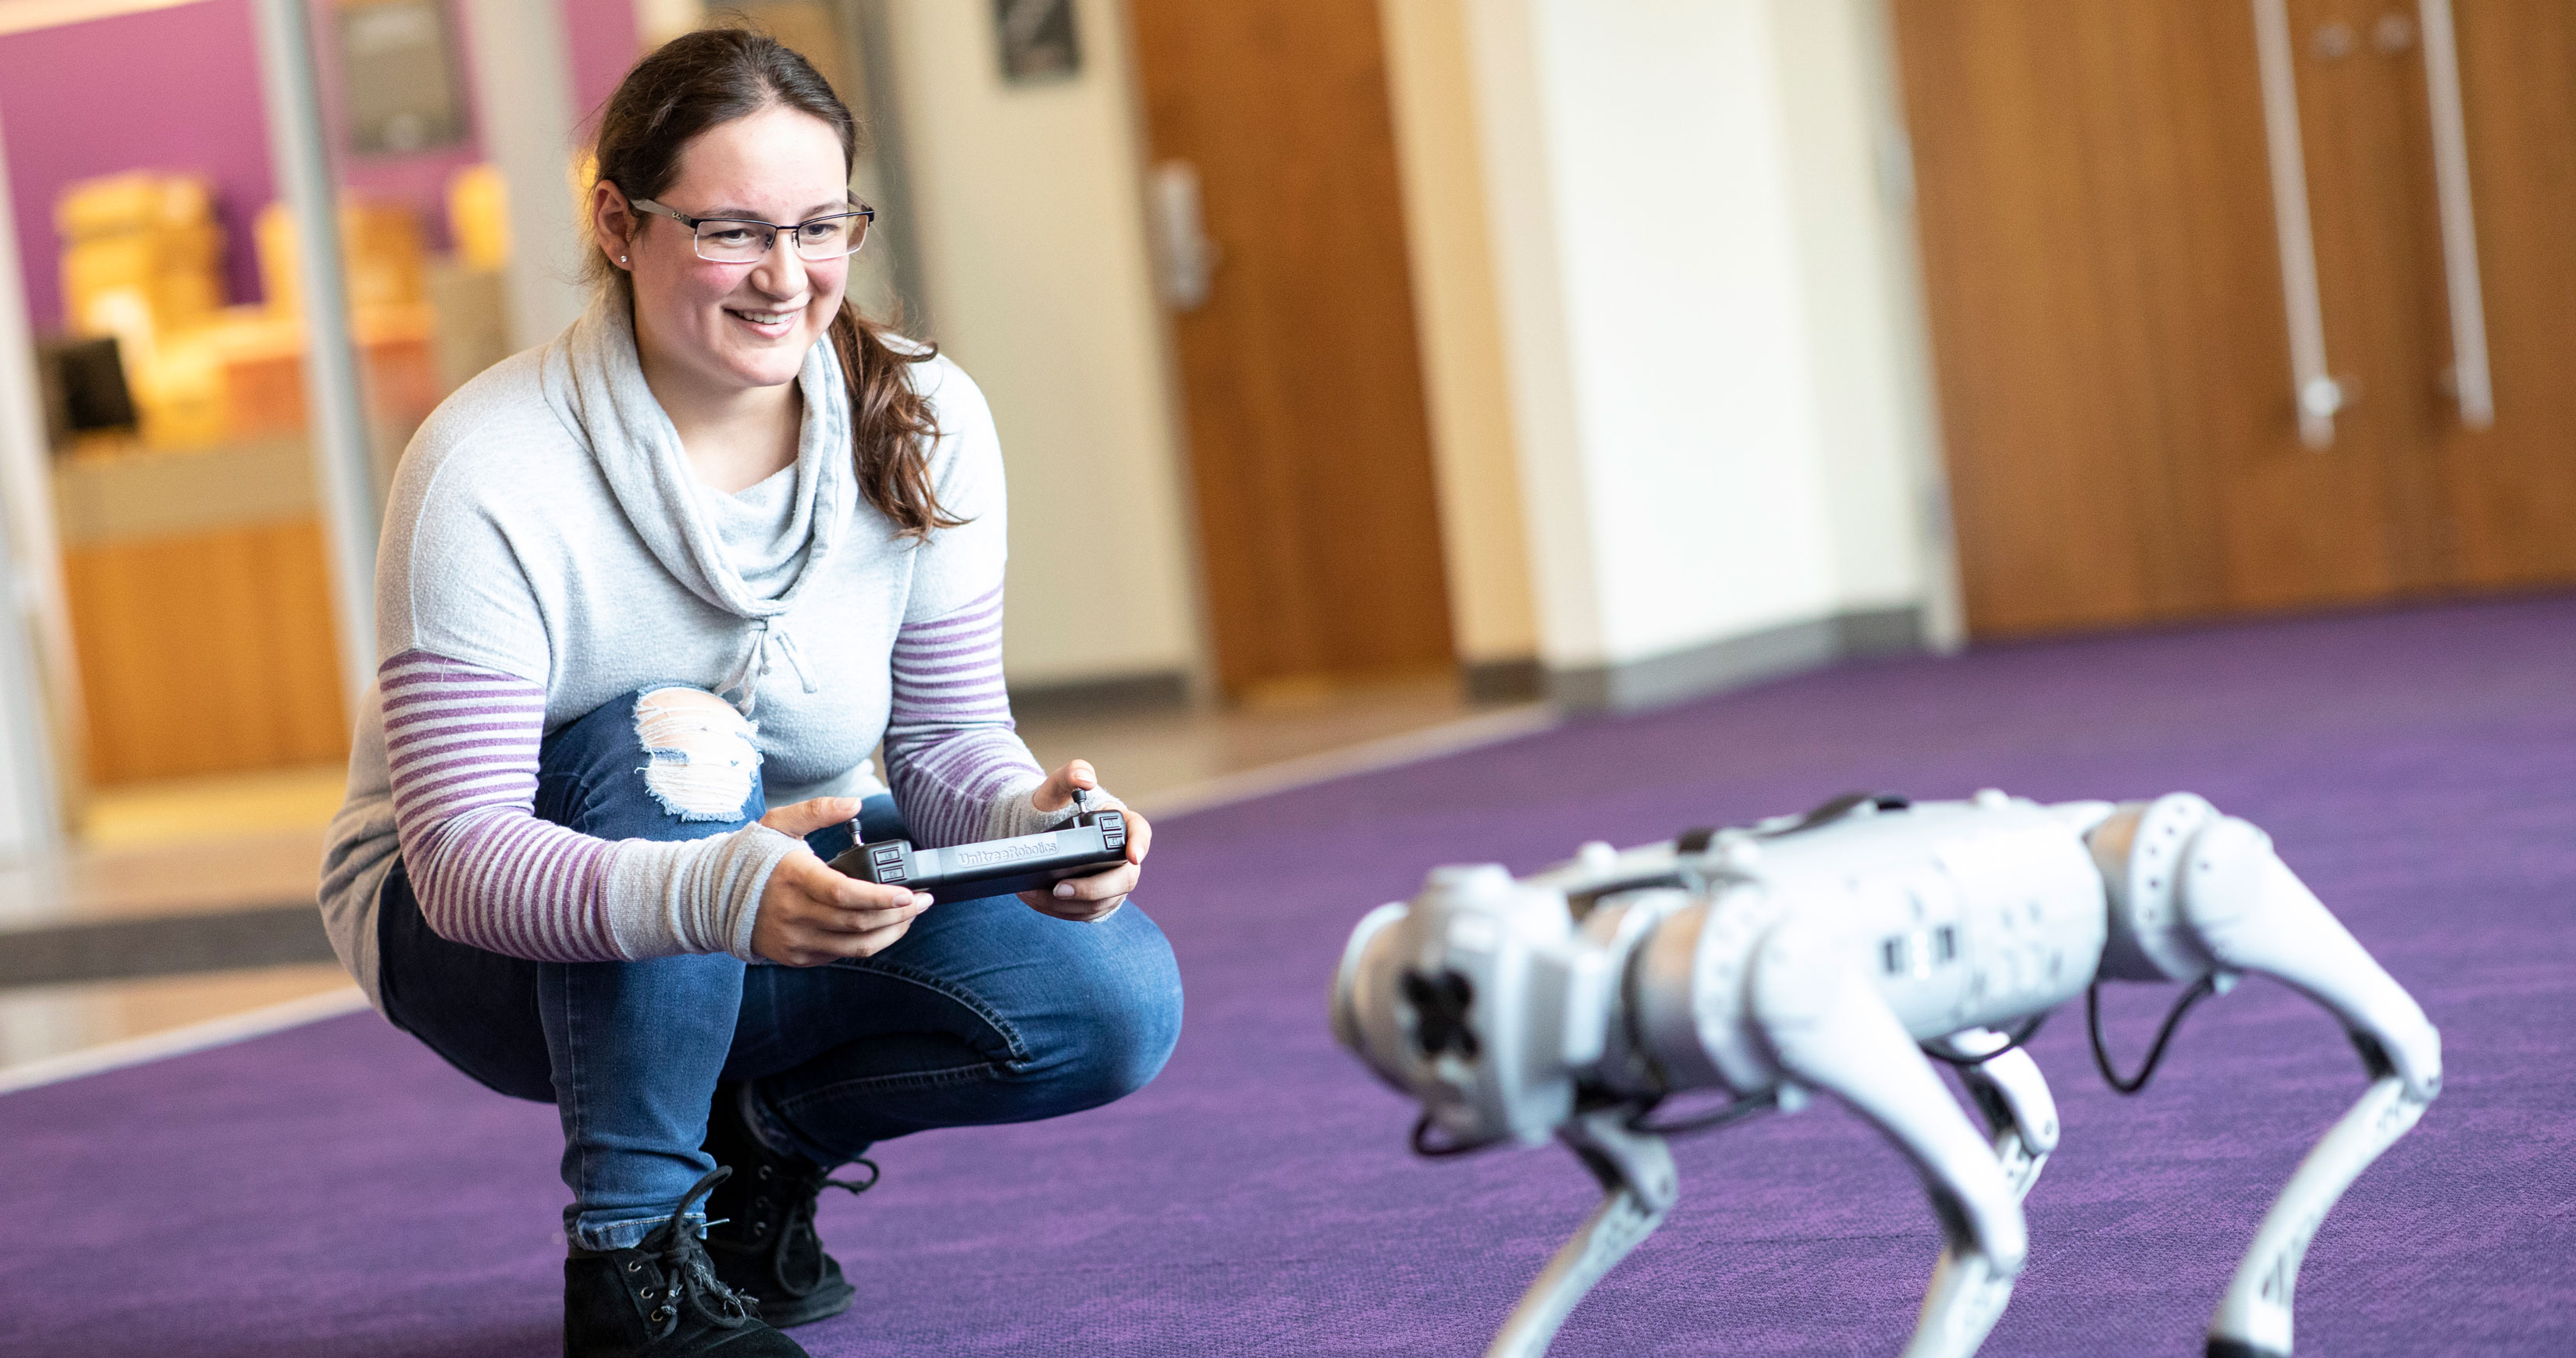 A smiling student holding a remote control crouches down next to a robot dog.